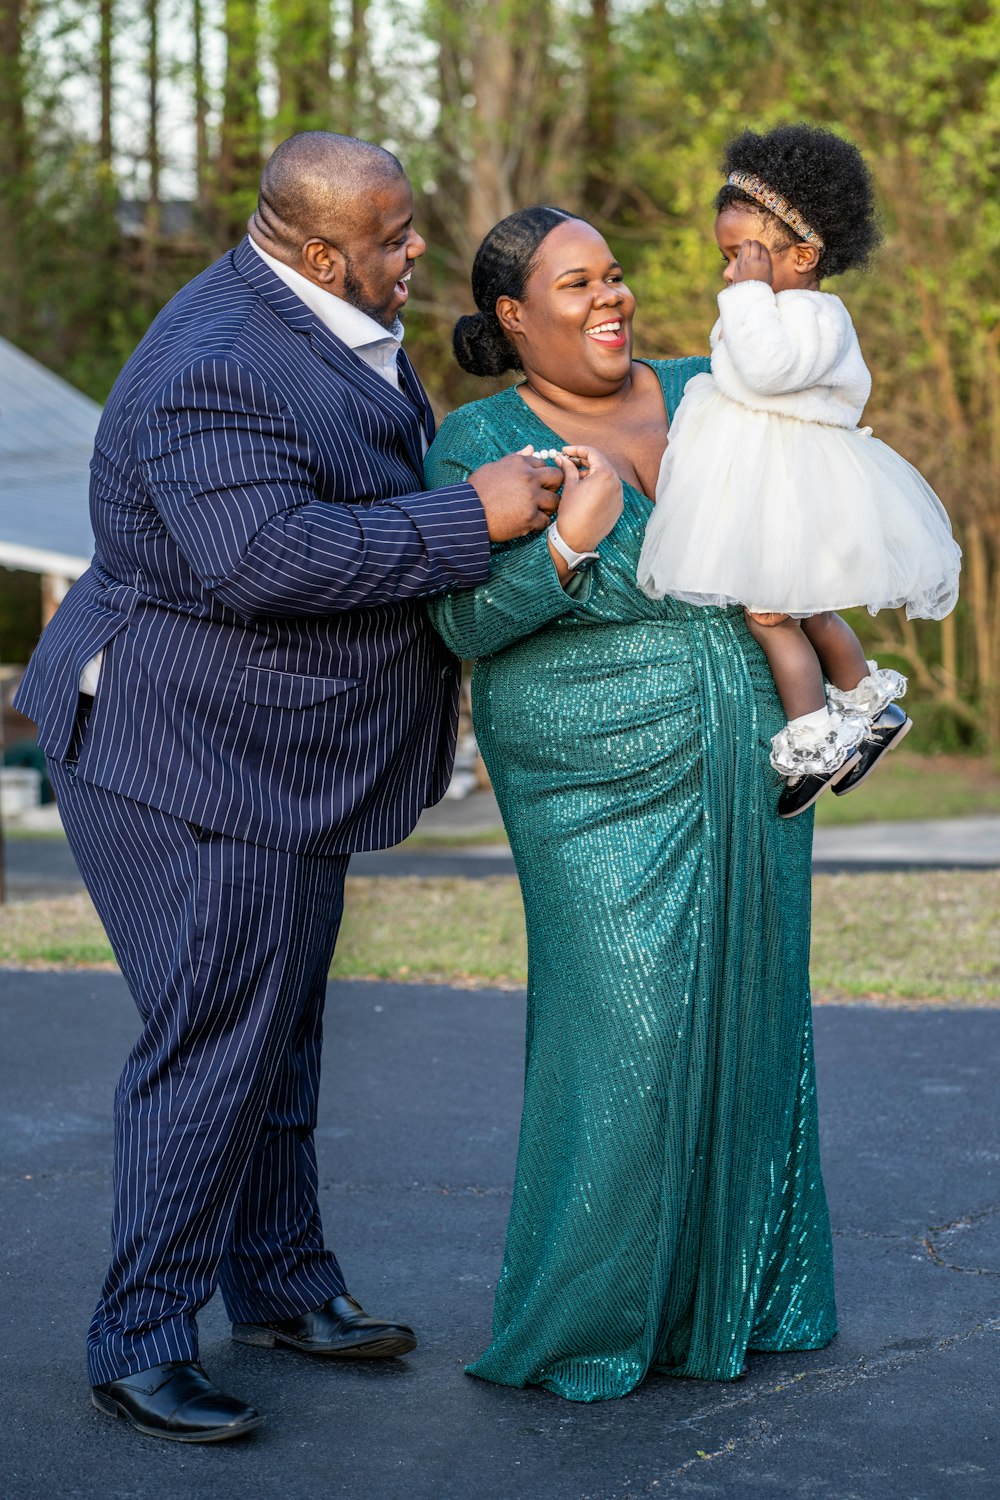 a woman in a green dress holding a baby and a man in a blue suit